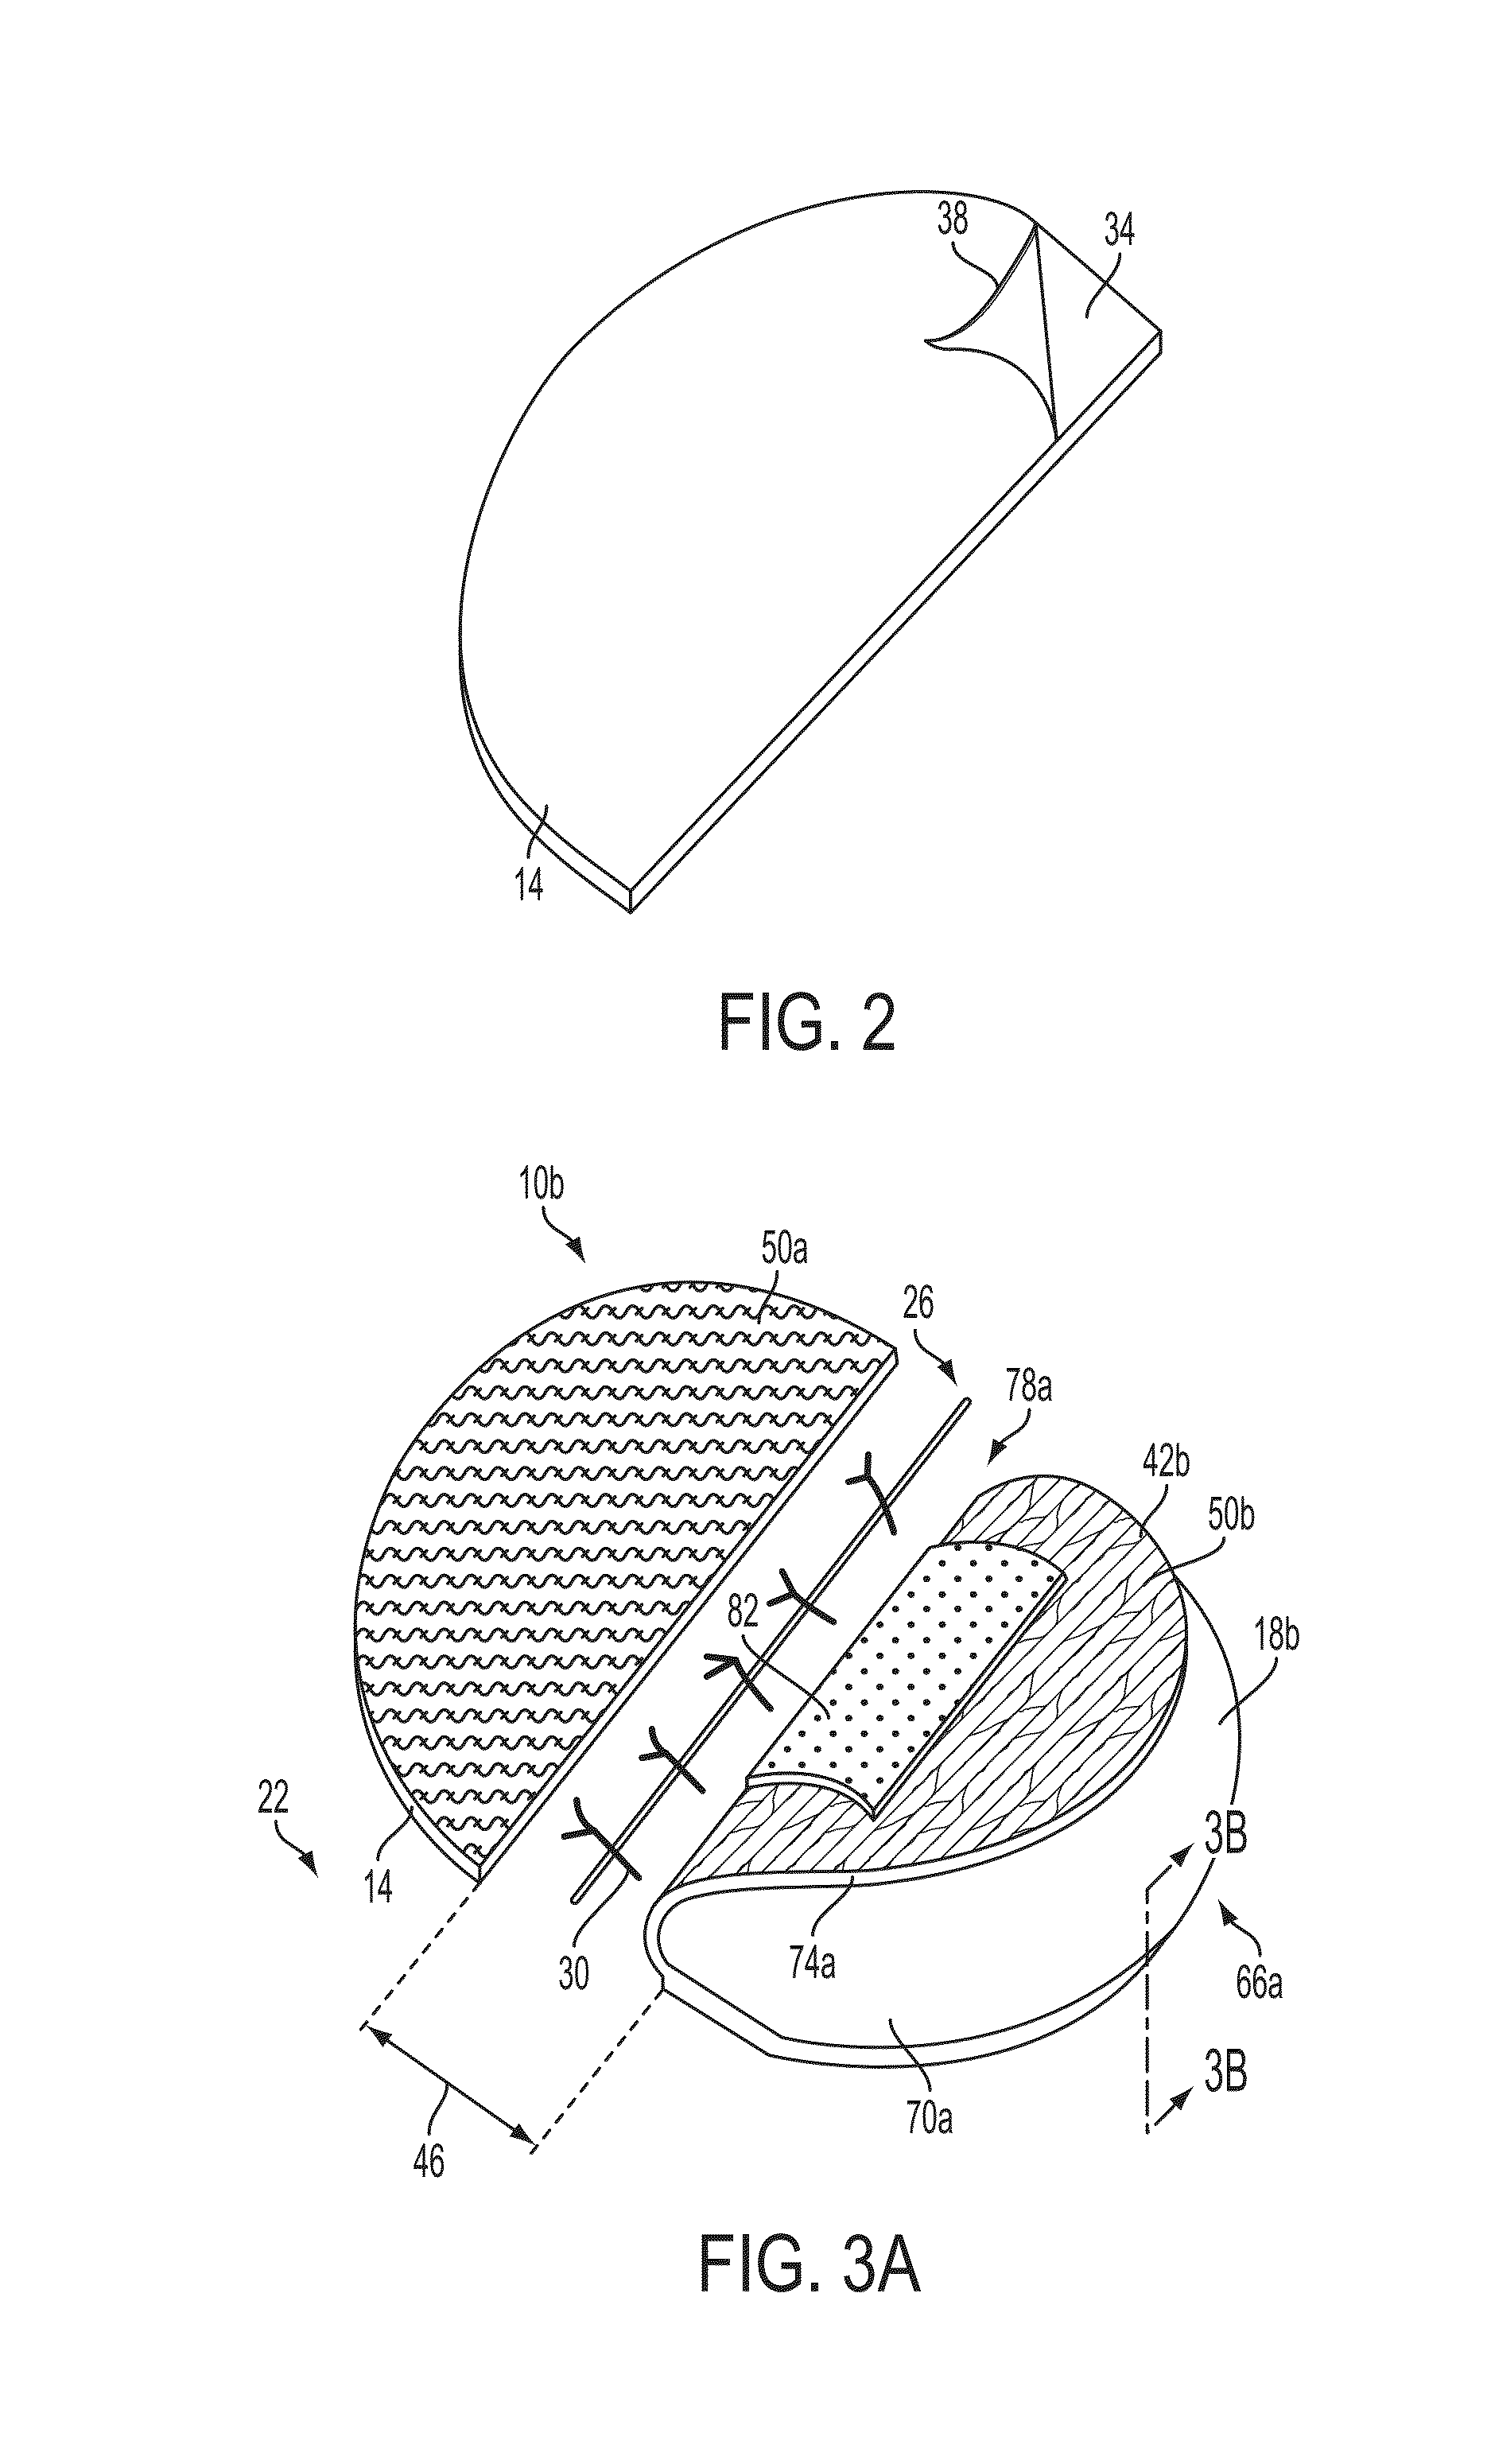 Apparatuses and methods for minimizing wound dehiscence, scar spread, and/or the like